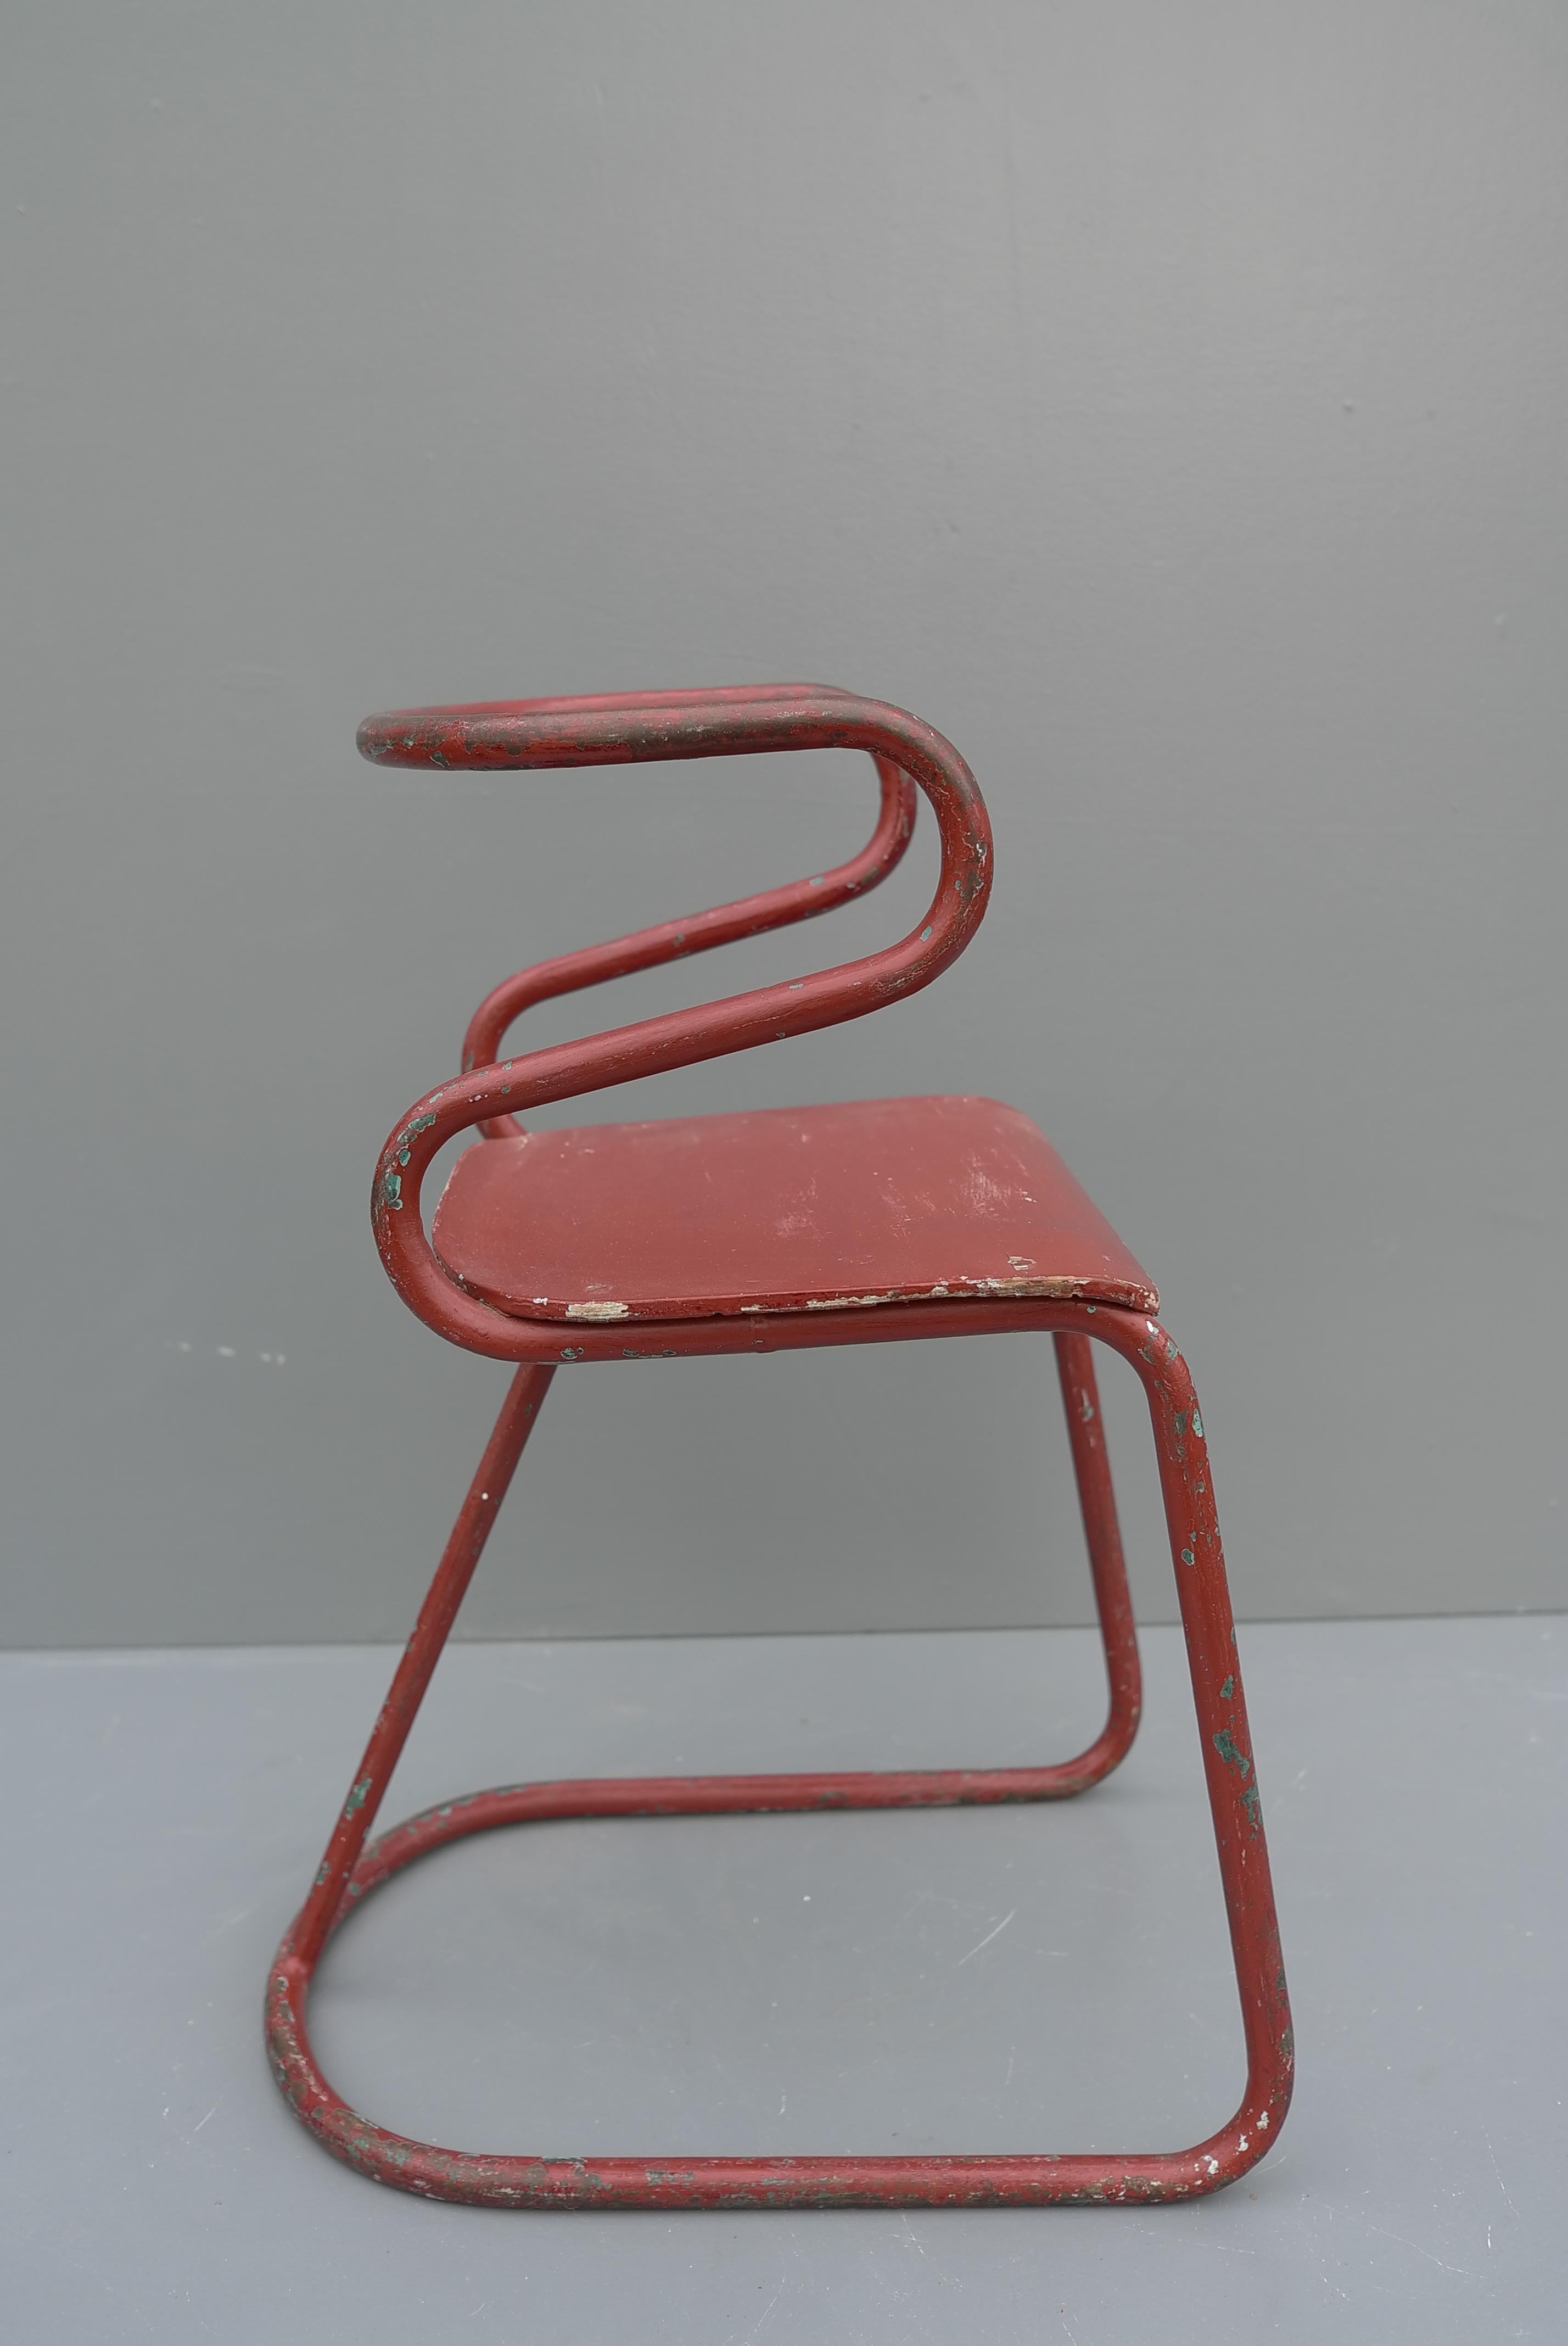 Red Sculptural Tubular Steel and Wood Mid-Century Modern Children Chair, 1950's For Sale 2